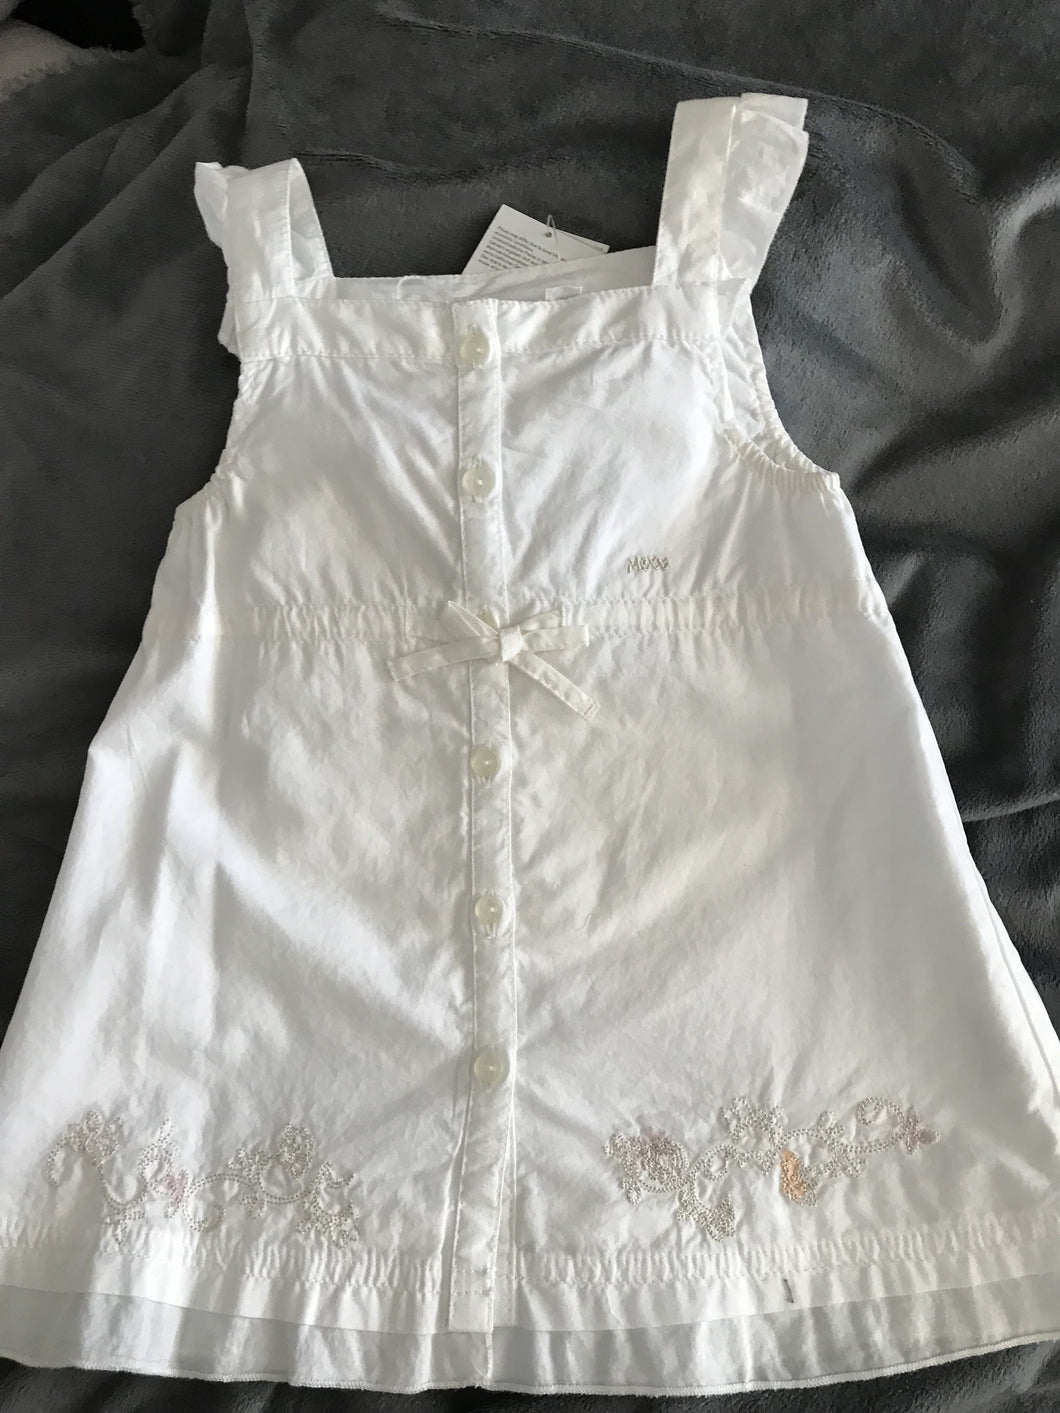 White embroidered baby dress.